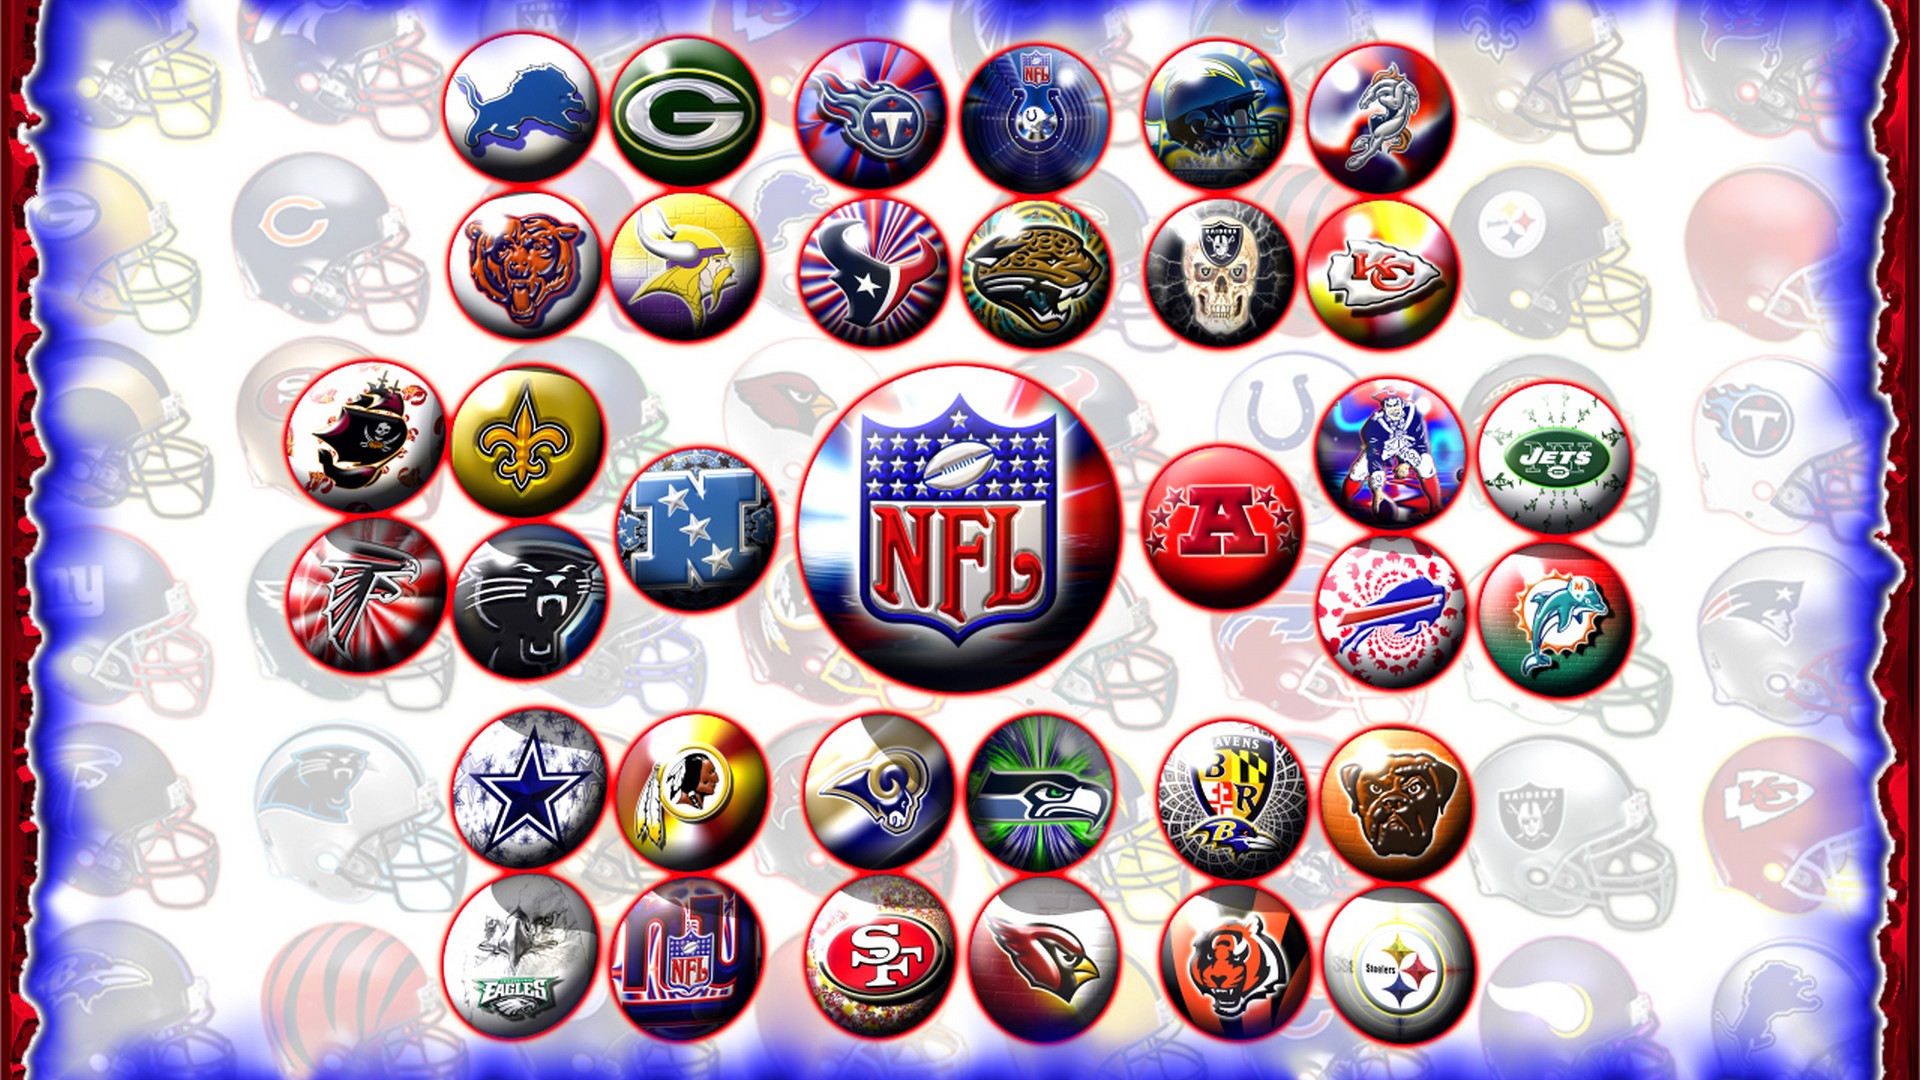 HD NFL Backgrounds 1920x1080